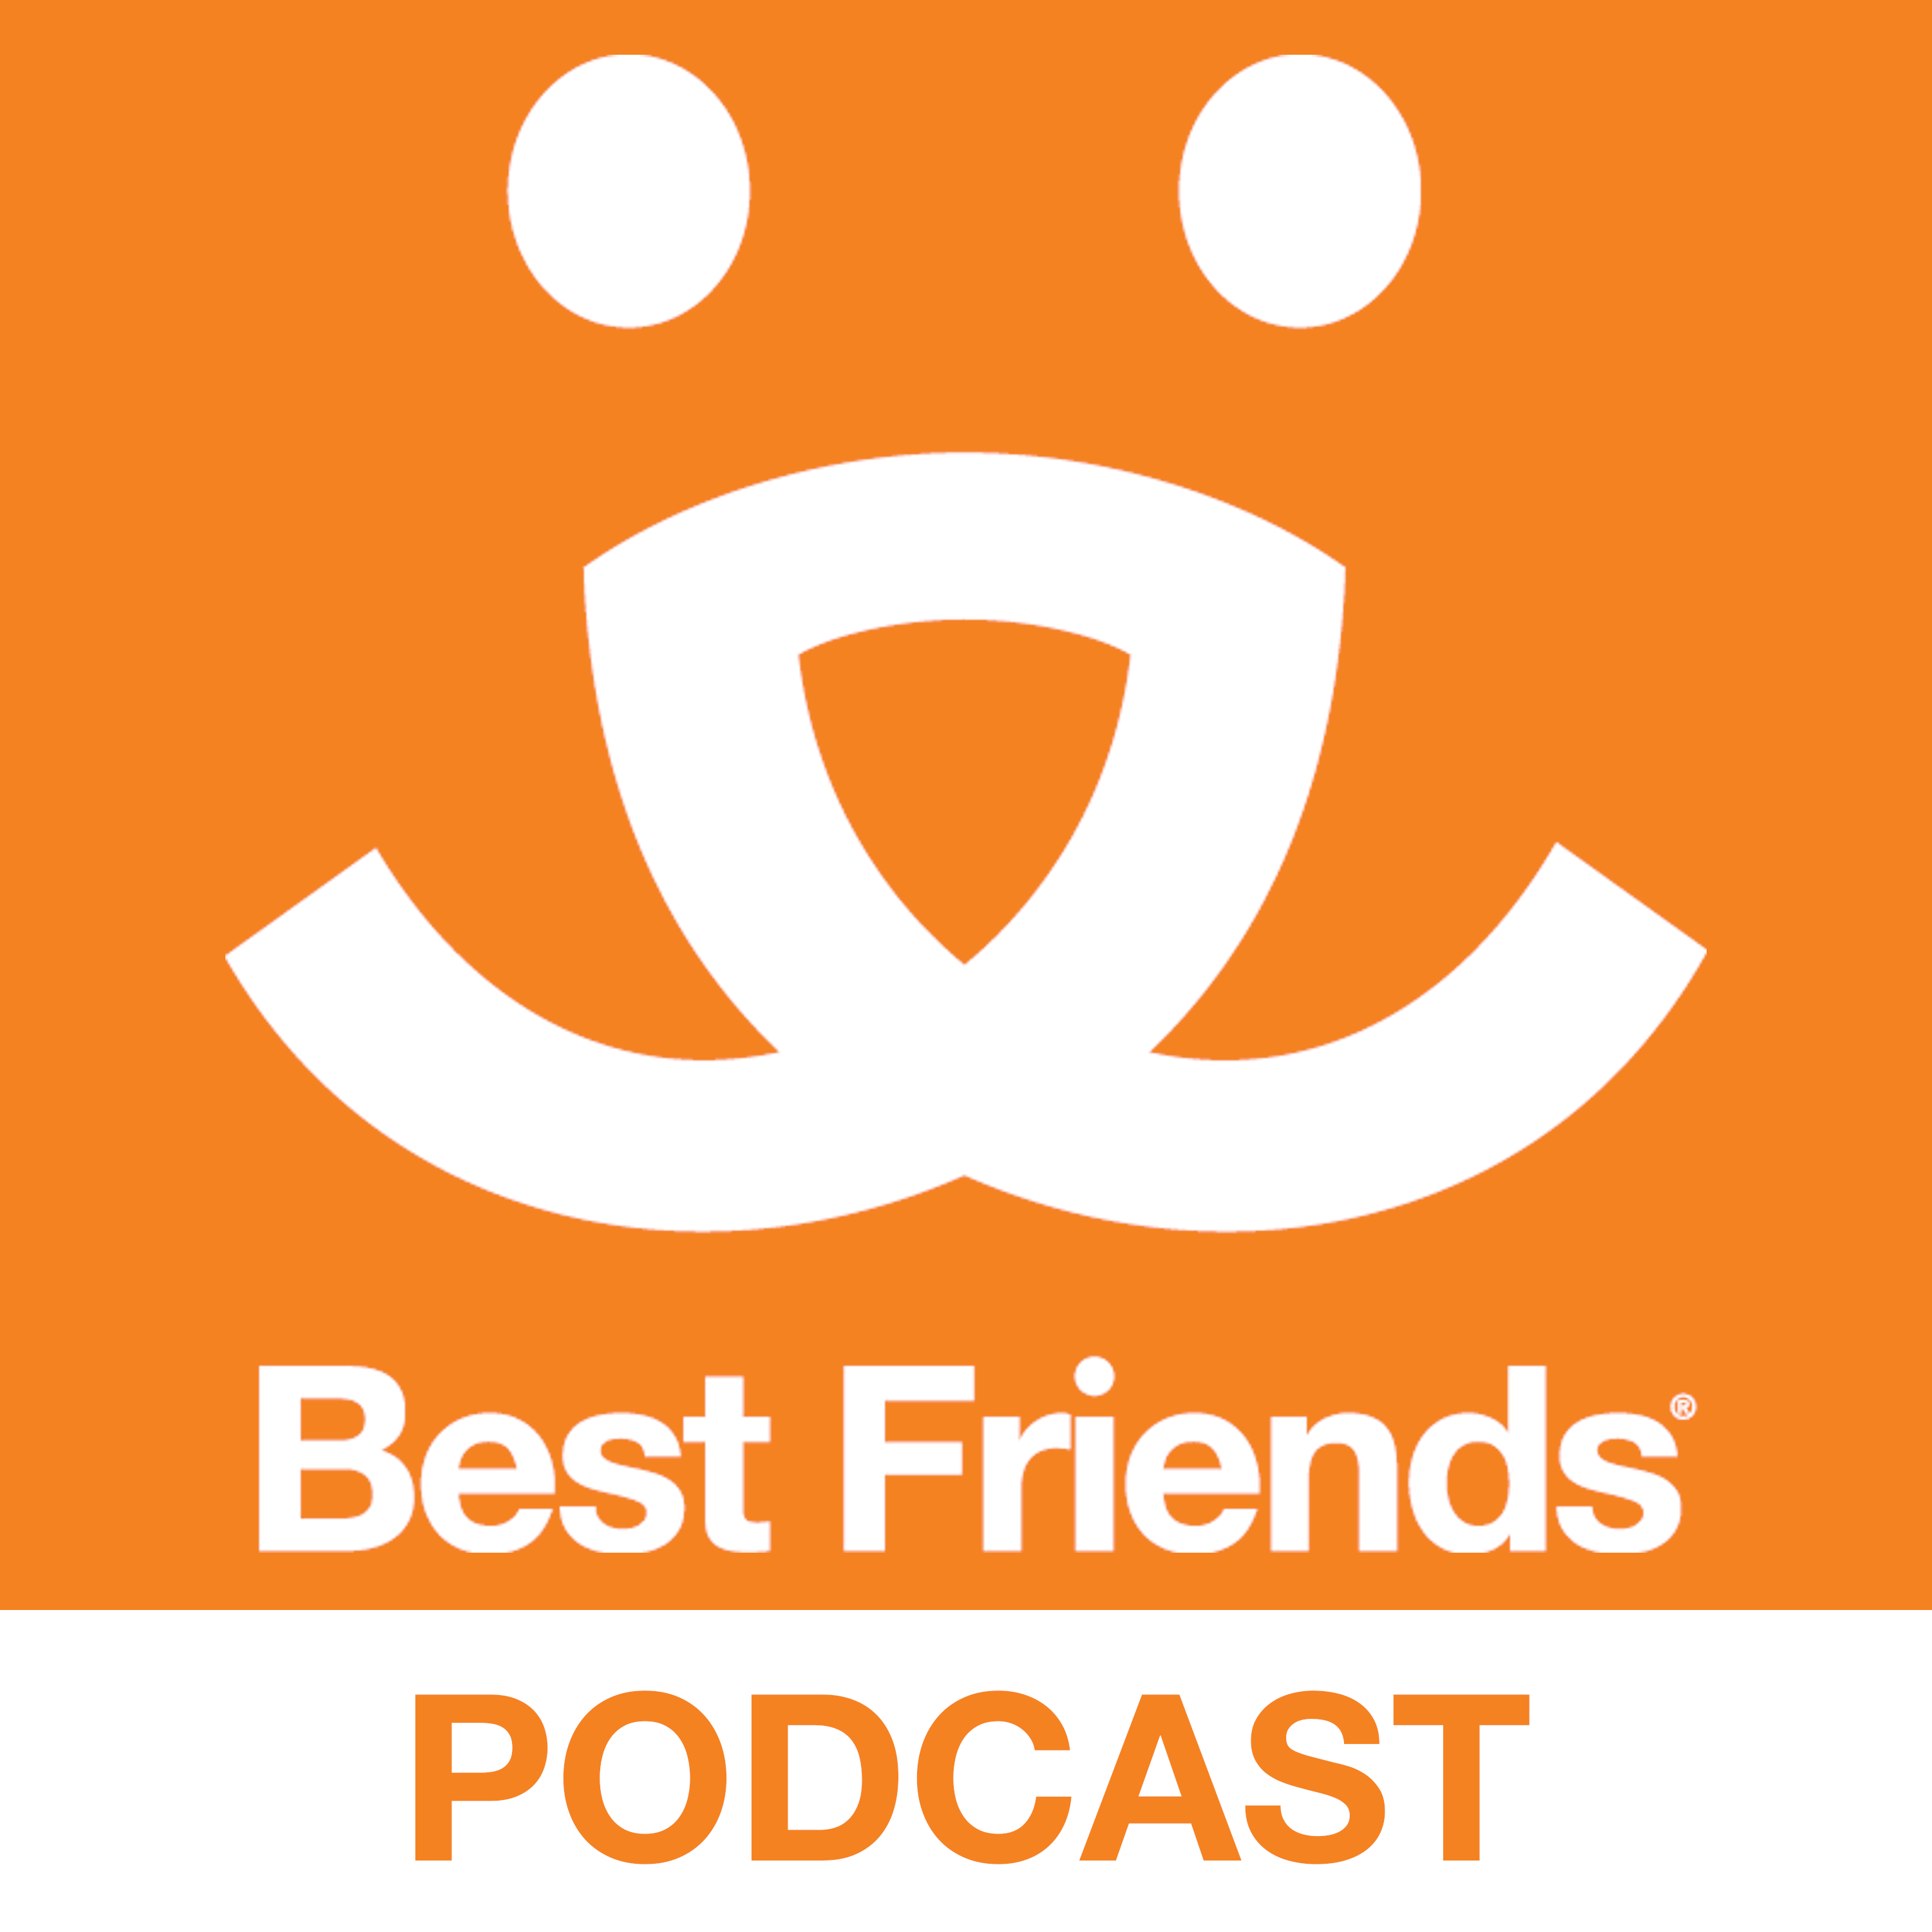 The logo for the best friends podcast